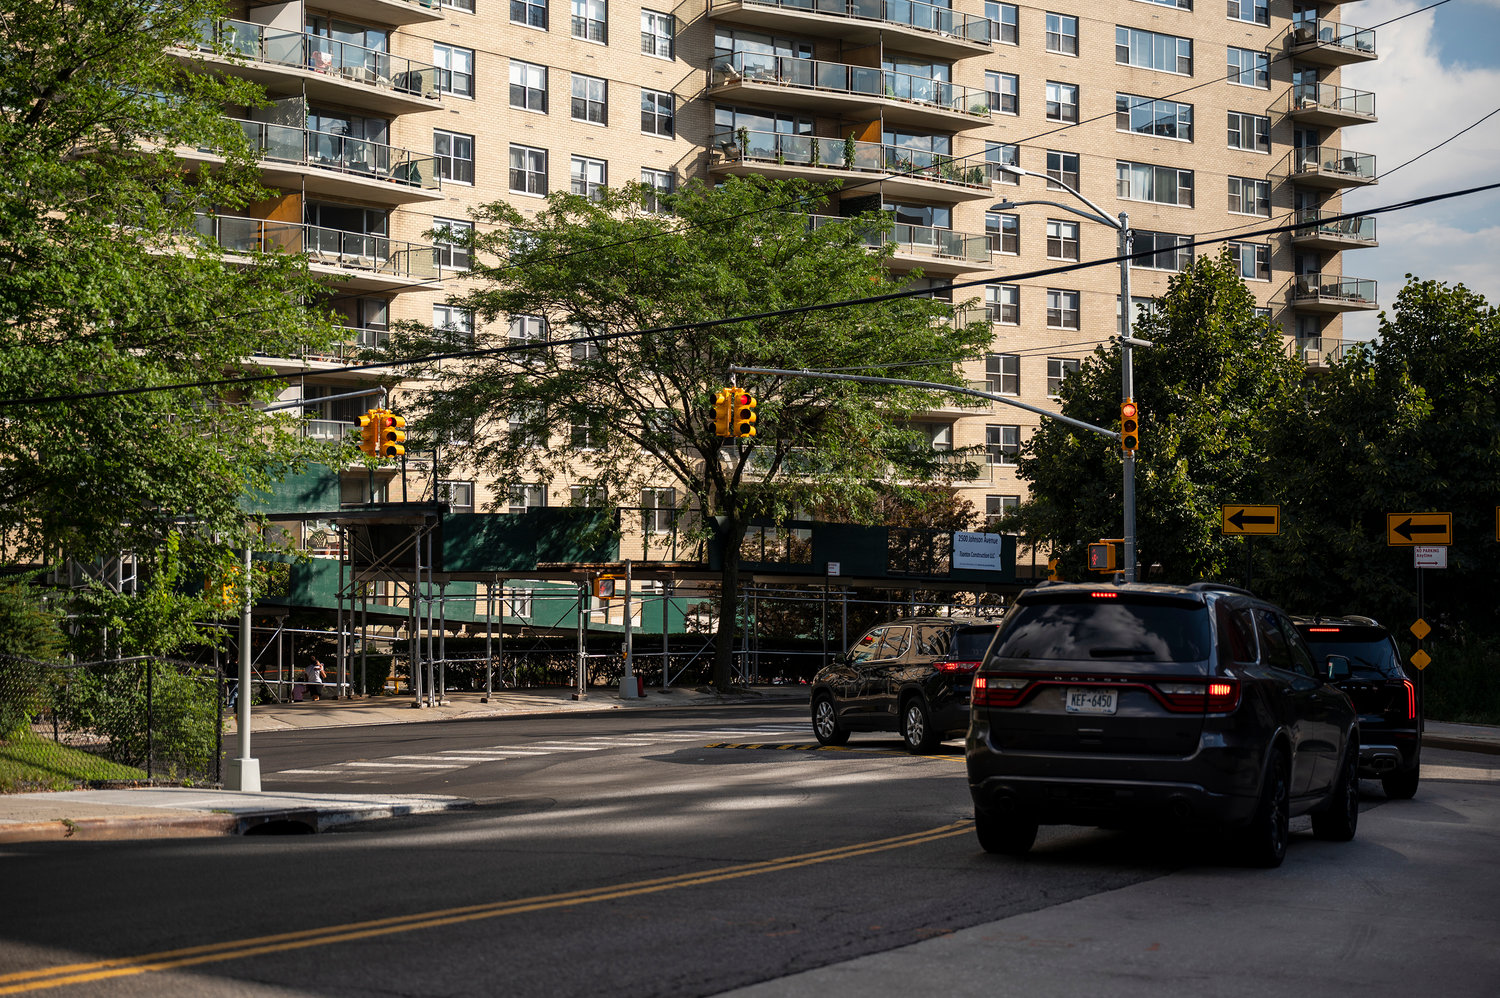 Residents finally win as the city DOT installed a traffic signal at Kappock Street and Johnson Avenue for pedestrian safety after one death last year. The traffic flow will remain slow, but this will prevent cars from speeding down the intersection.